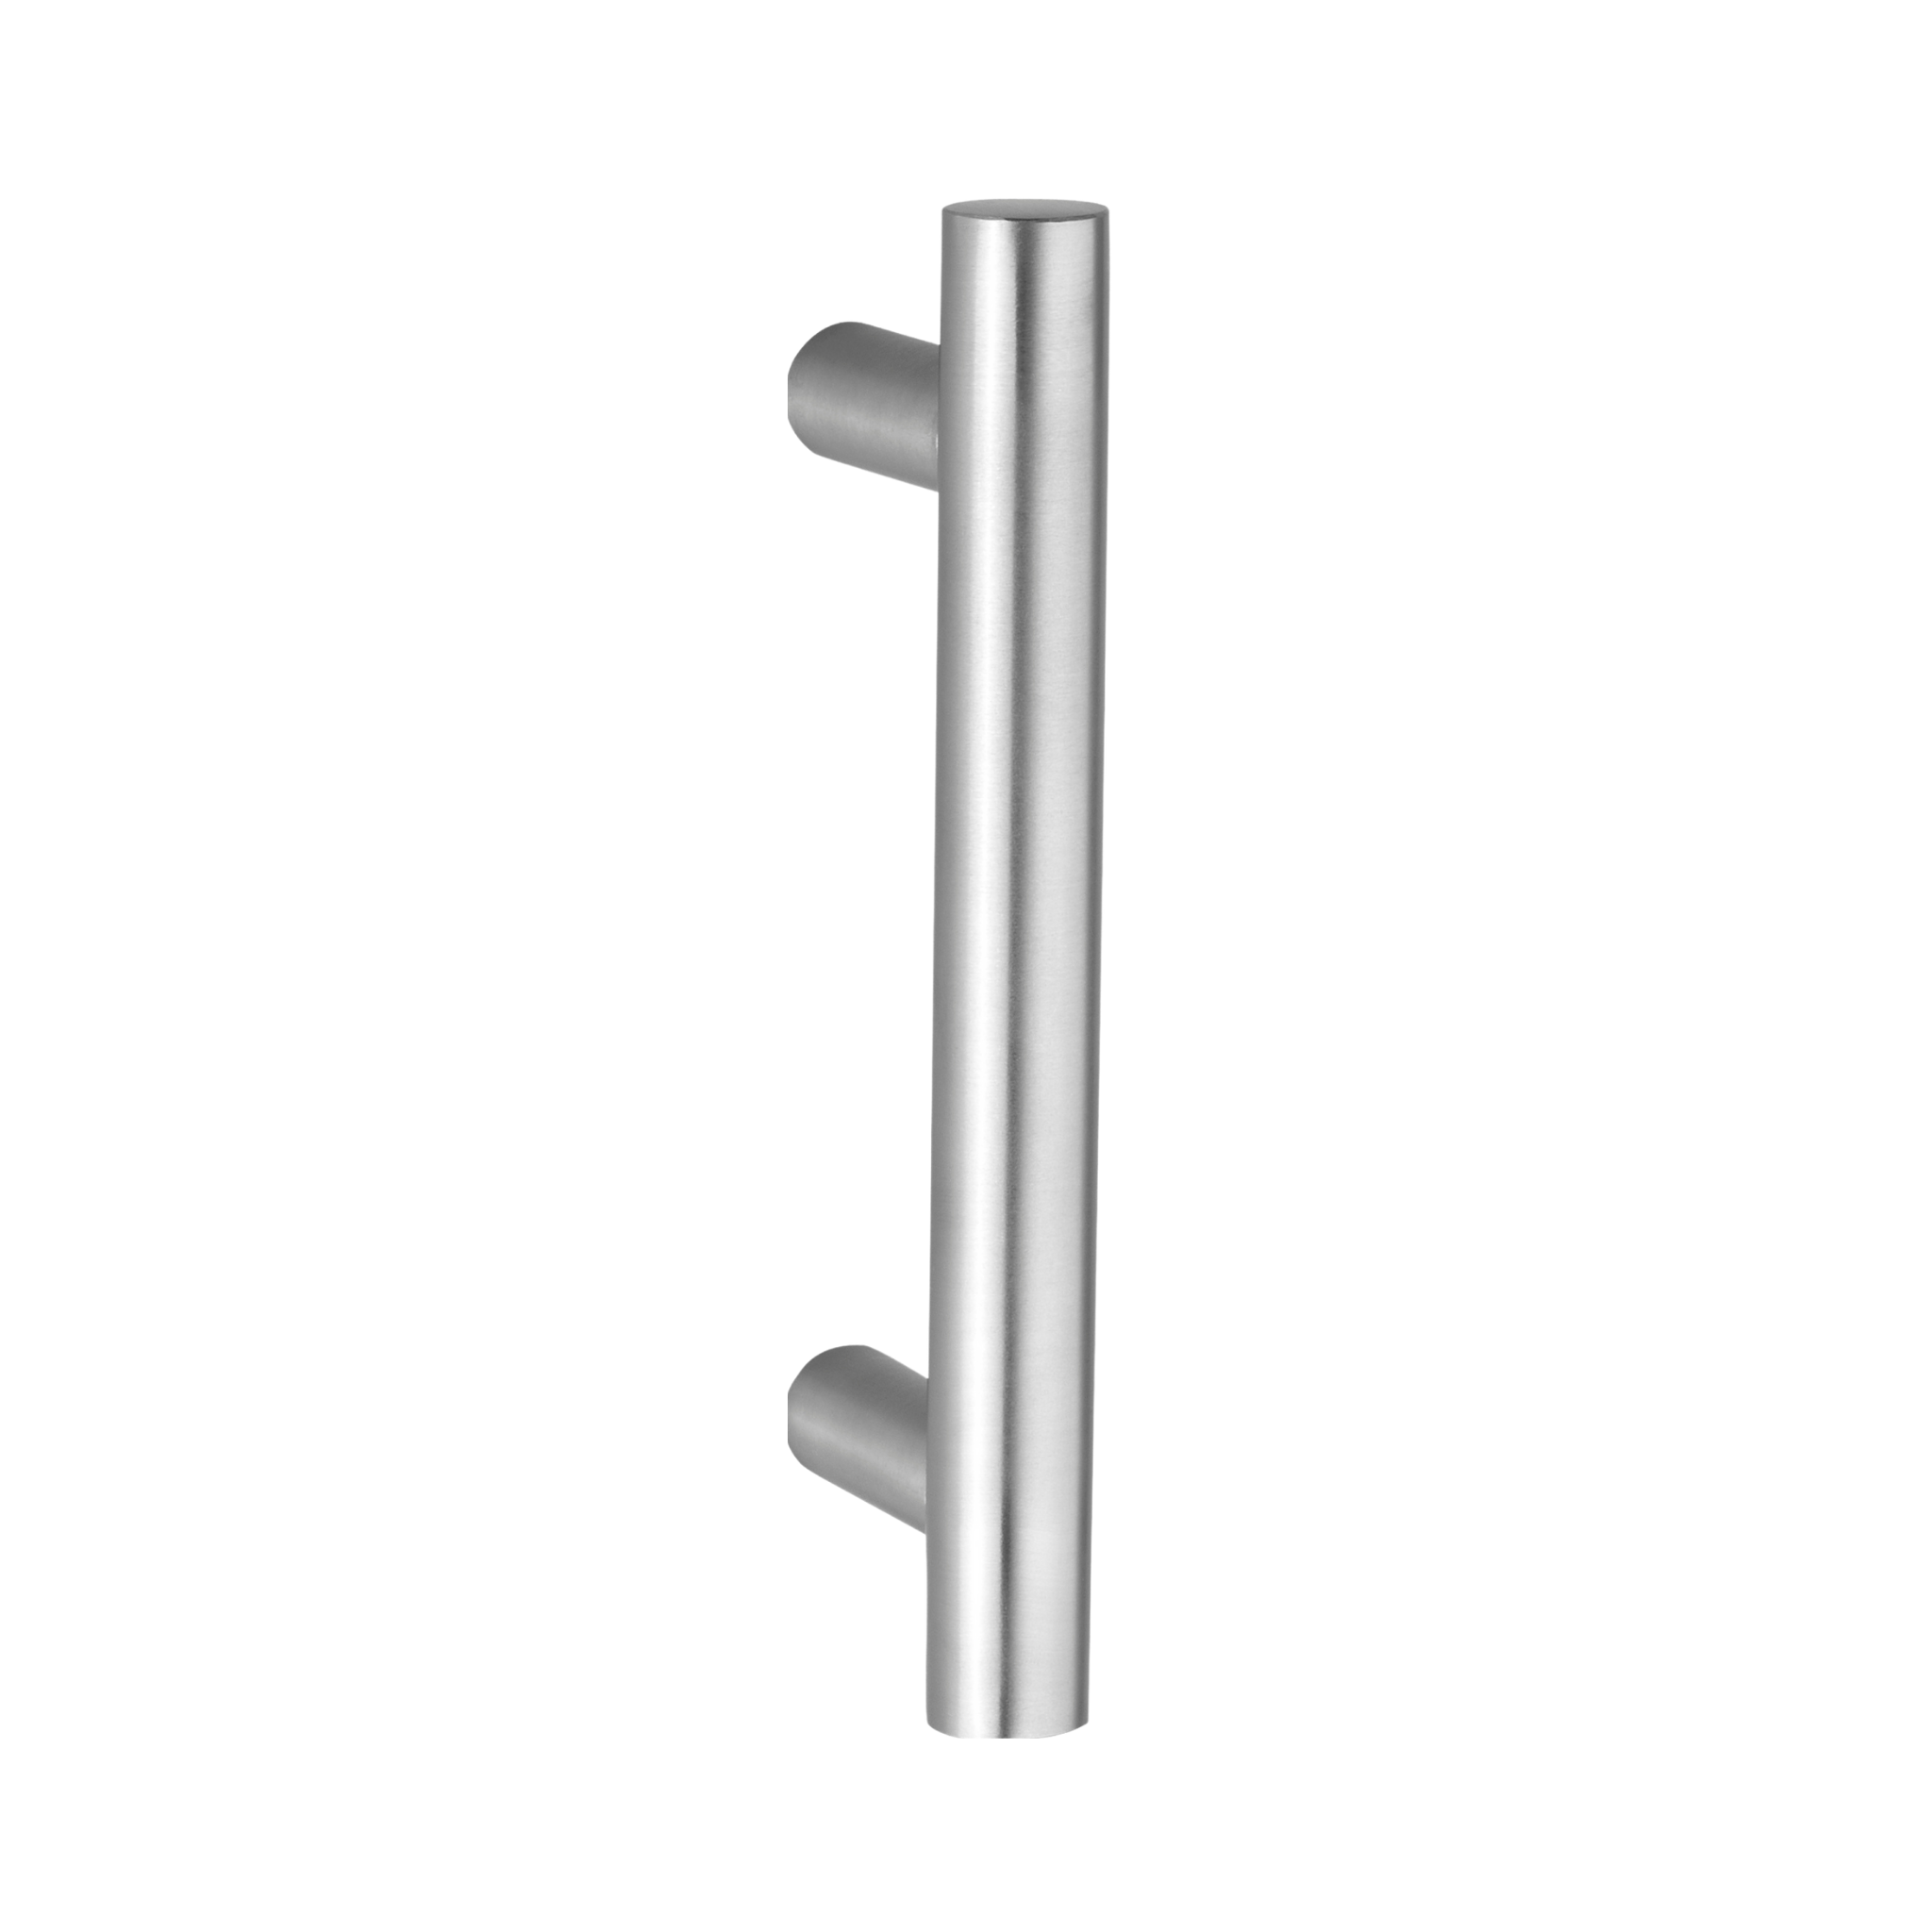 FP.T06.BB.TR, Pull Handle, Tubular, T Handle, BTB, 32mm (Ø) x 1500mm (l) x 1275mm (ctc), Stainless Steel with Tarnish Resistant, CISA